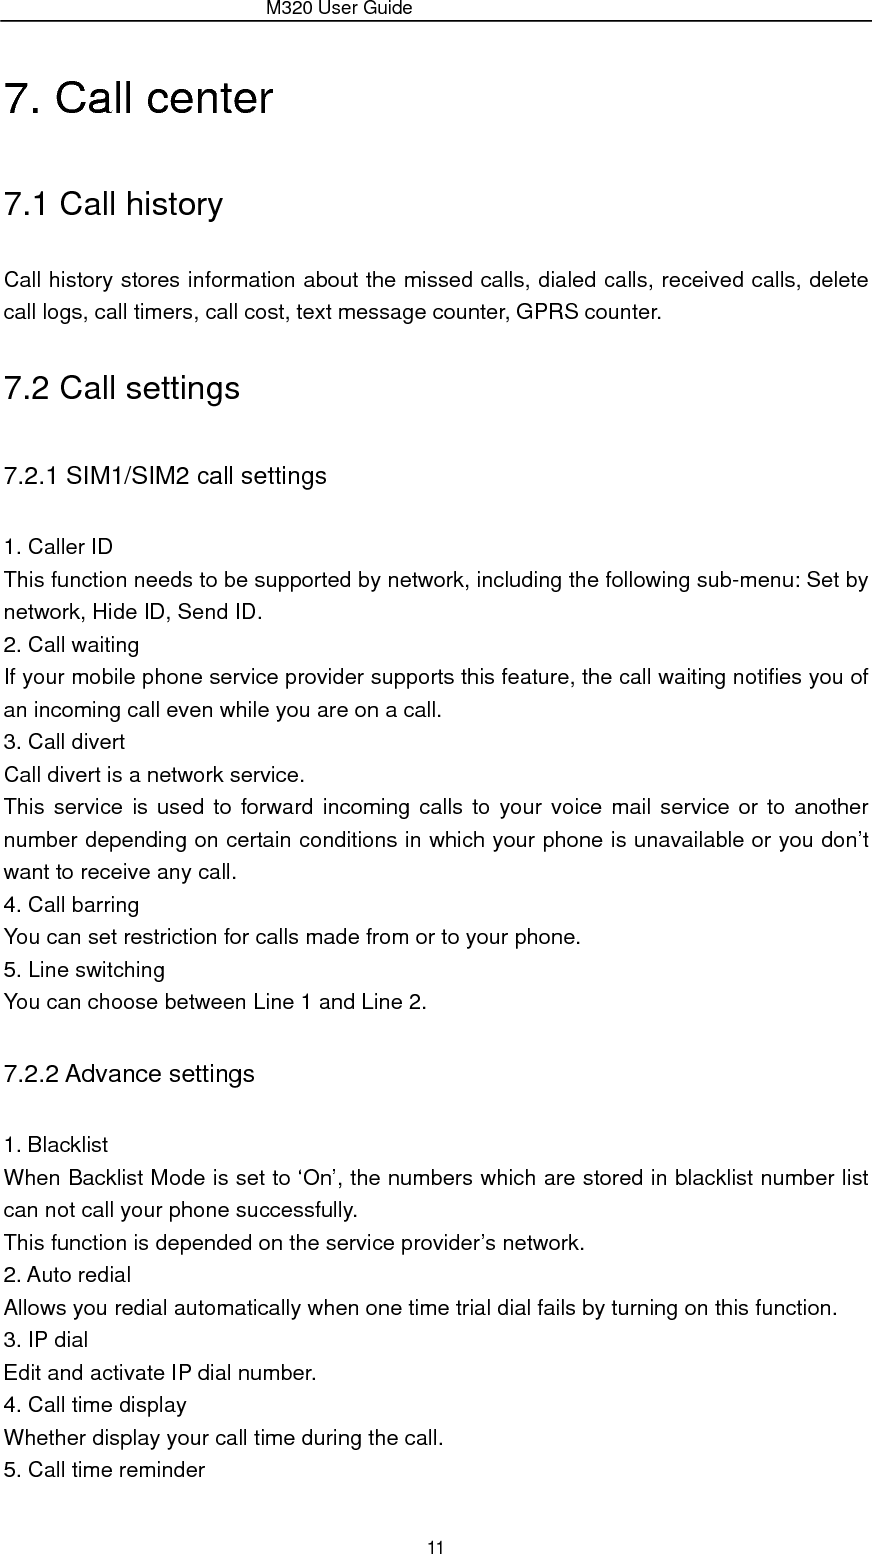                 M320 User Guide 11 7. Call center 7.1 Call history Call history stores information about the missed calls, dialed calls, received calls, delete call logs, call timers, call cost, text message counter, GPRS counter. 7.2 Call settings 7.2.1 SIM1/SIM2 call settings 1. Caller ID This function needs to be supported by network, including the following sub-menu: Set by network, Hide ID, Send ID. 2. Call waiting If your mobile phone service provider supports this feature, the call waiting notifies you of an incoming call even while you are on a call.   3. Call divert Call divert is a network service. This service is used to forward incoming calls to your voice mail service or to another number depending on certain conditions in which your phone is unavailable or you don’t want to receive any call.   4. Call barring You can set restriction for calls made from or to your phone. 5. Line switching You can choose between Line 1 and Line 2. 7.2.2 Advance settings 1. Blacklist When Backlist Mode is set to ‘On’, the numbers which are stored in blacklist number list can not call your phone successfully. This function is depended on the service provider’s network. 2. Auto redial Allows you redial automatically when one time trial dial fails by turning on this function. 3. IP dial Edit and activate IP dial number. 4. Call time display Whether display your call time during the call. 5. Call time reminder 